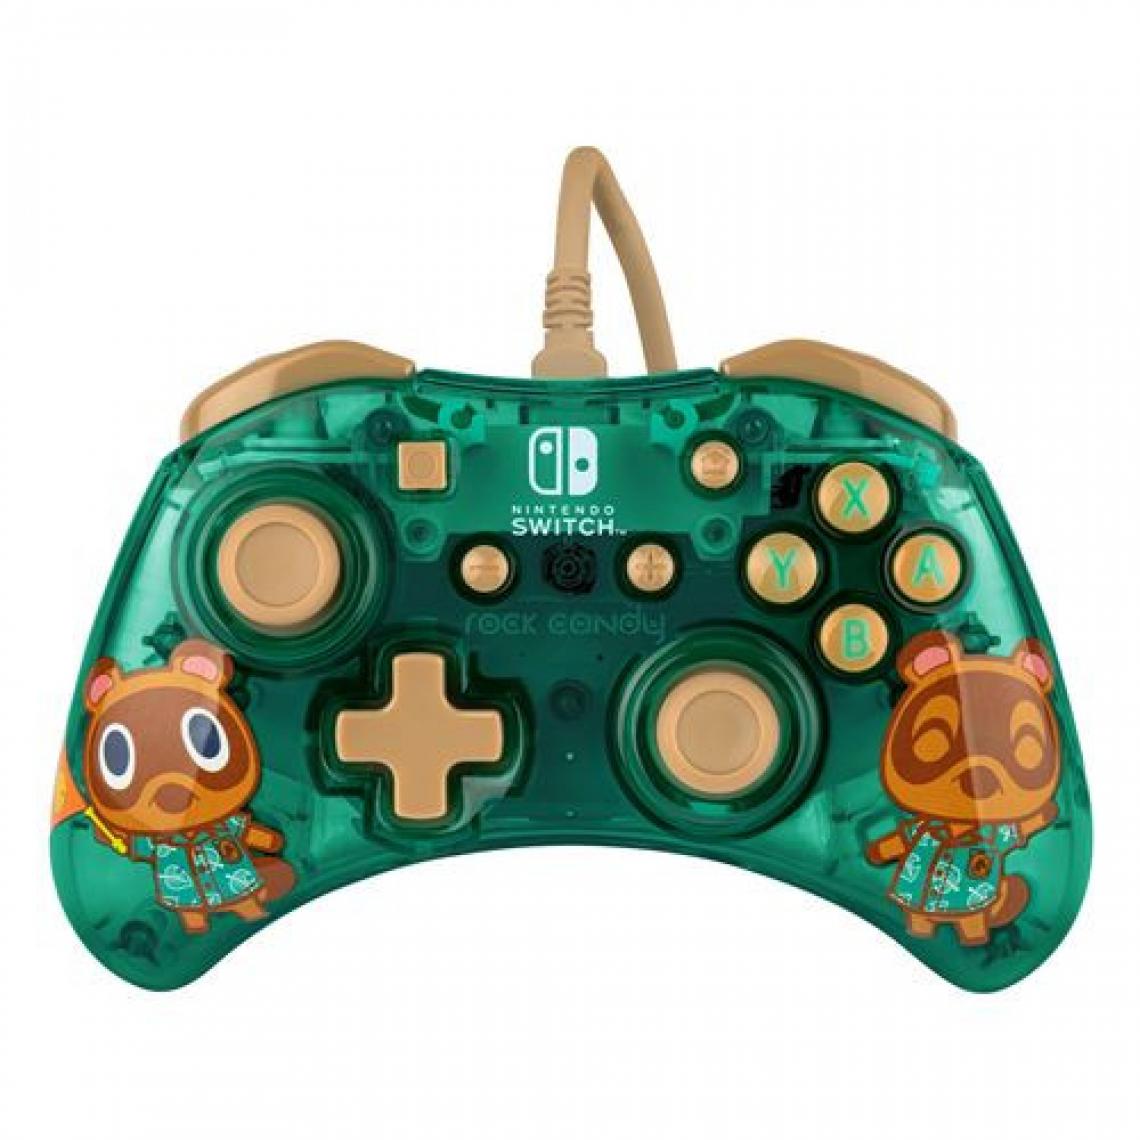 PDP - Manette gaming filaire pour Nintendo Switch Pdp Rock Candy Mini Animal Crossing - Joystick